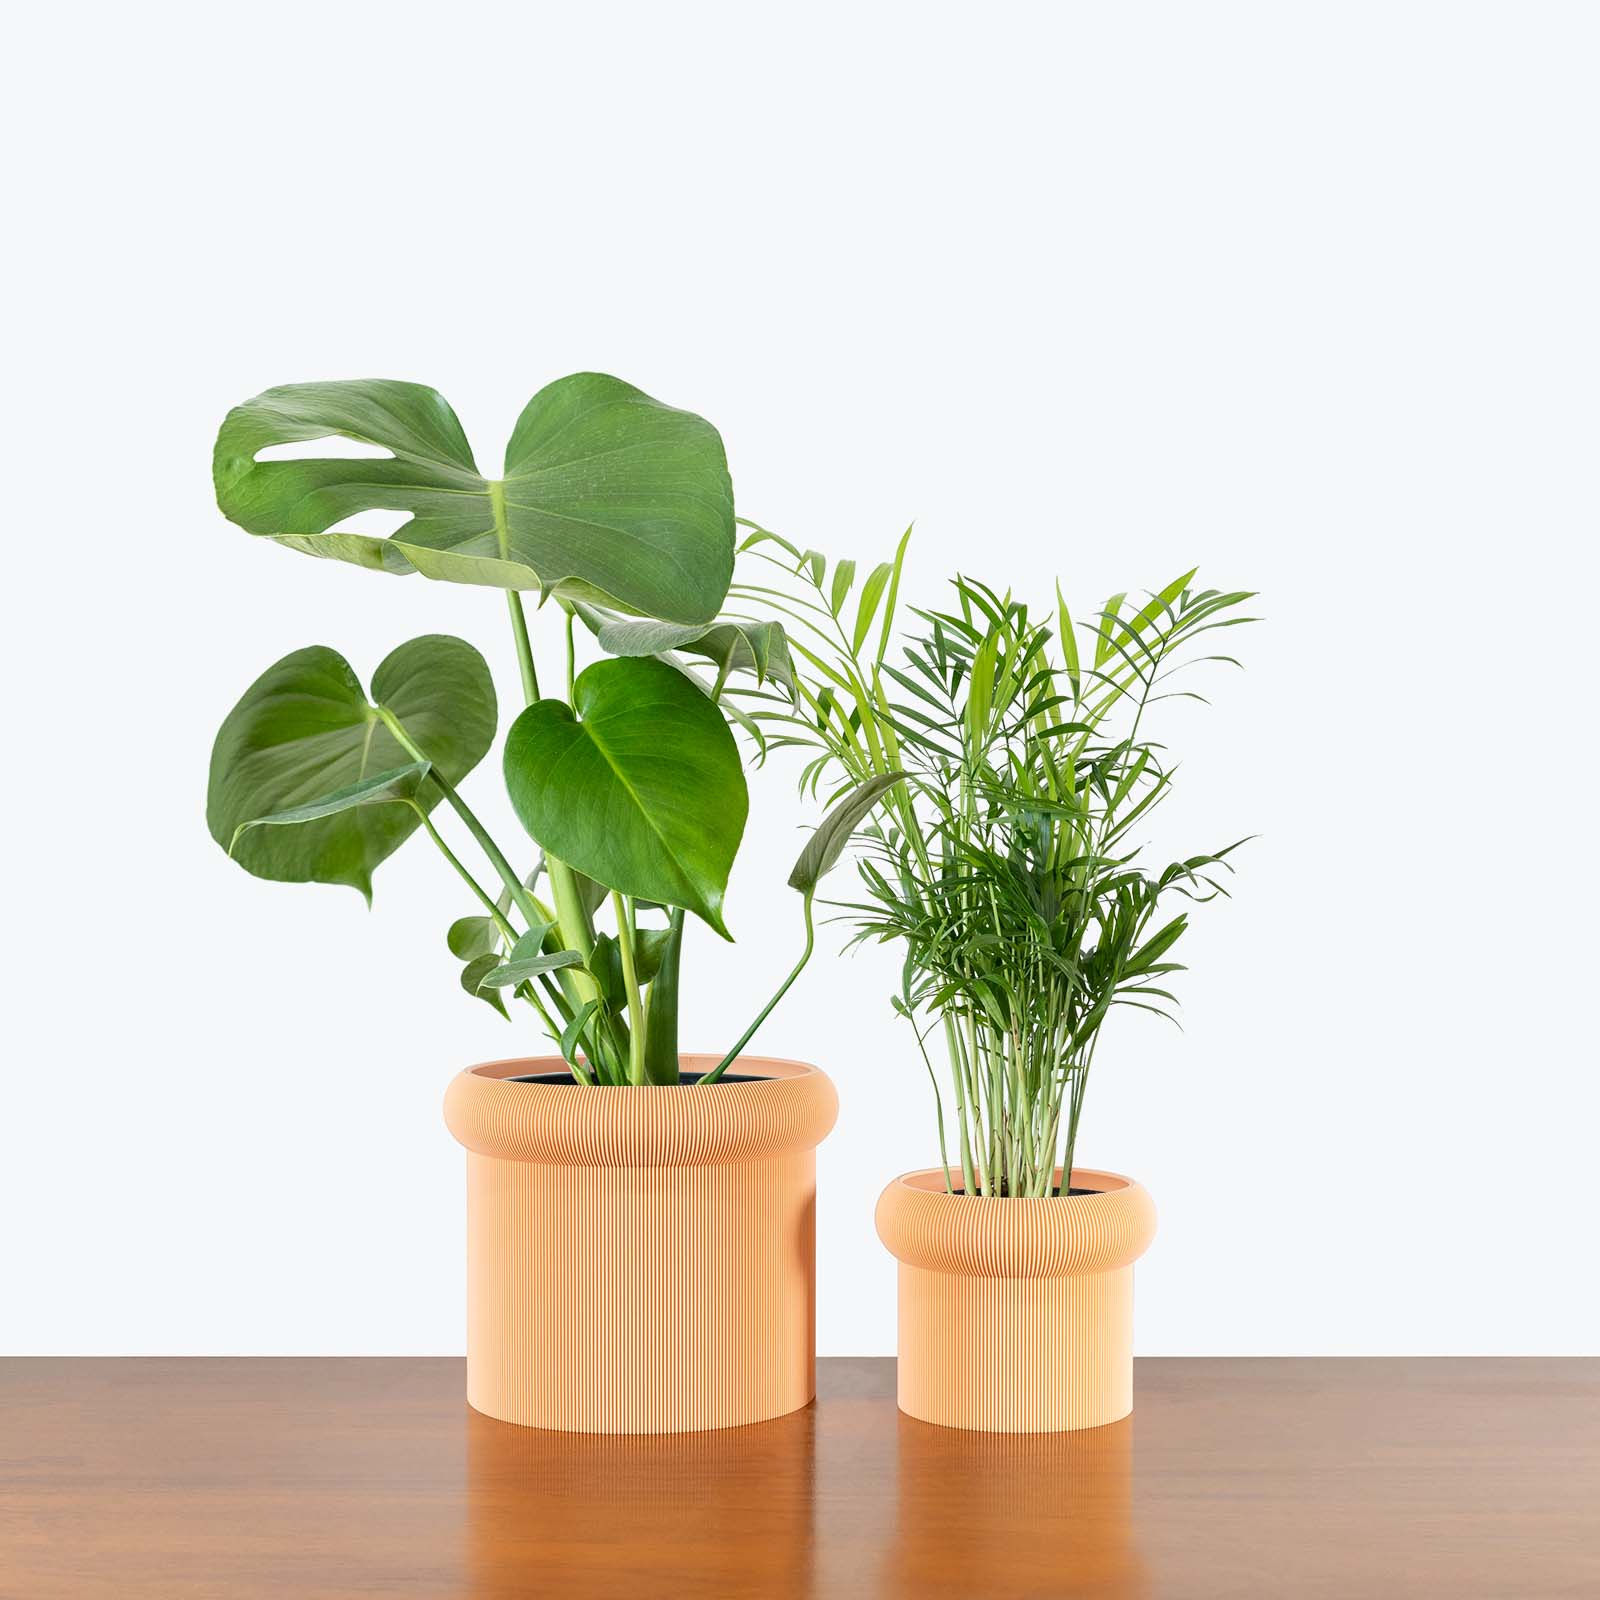 Best Selling Duo in 3D Printed Eco Friendly Mushroom Peach Planter - House Plants Delivery Toronto - JOMO Studio #planter_mushroom planter